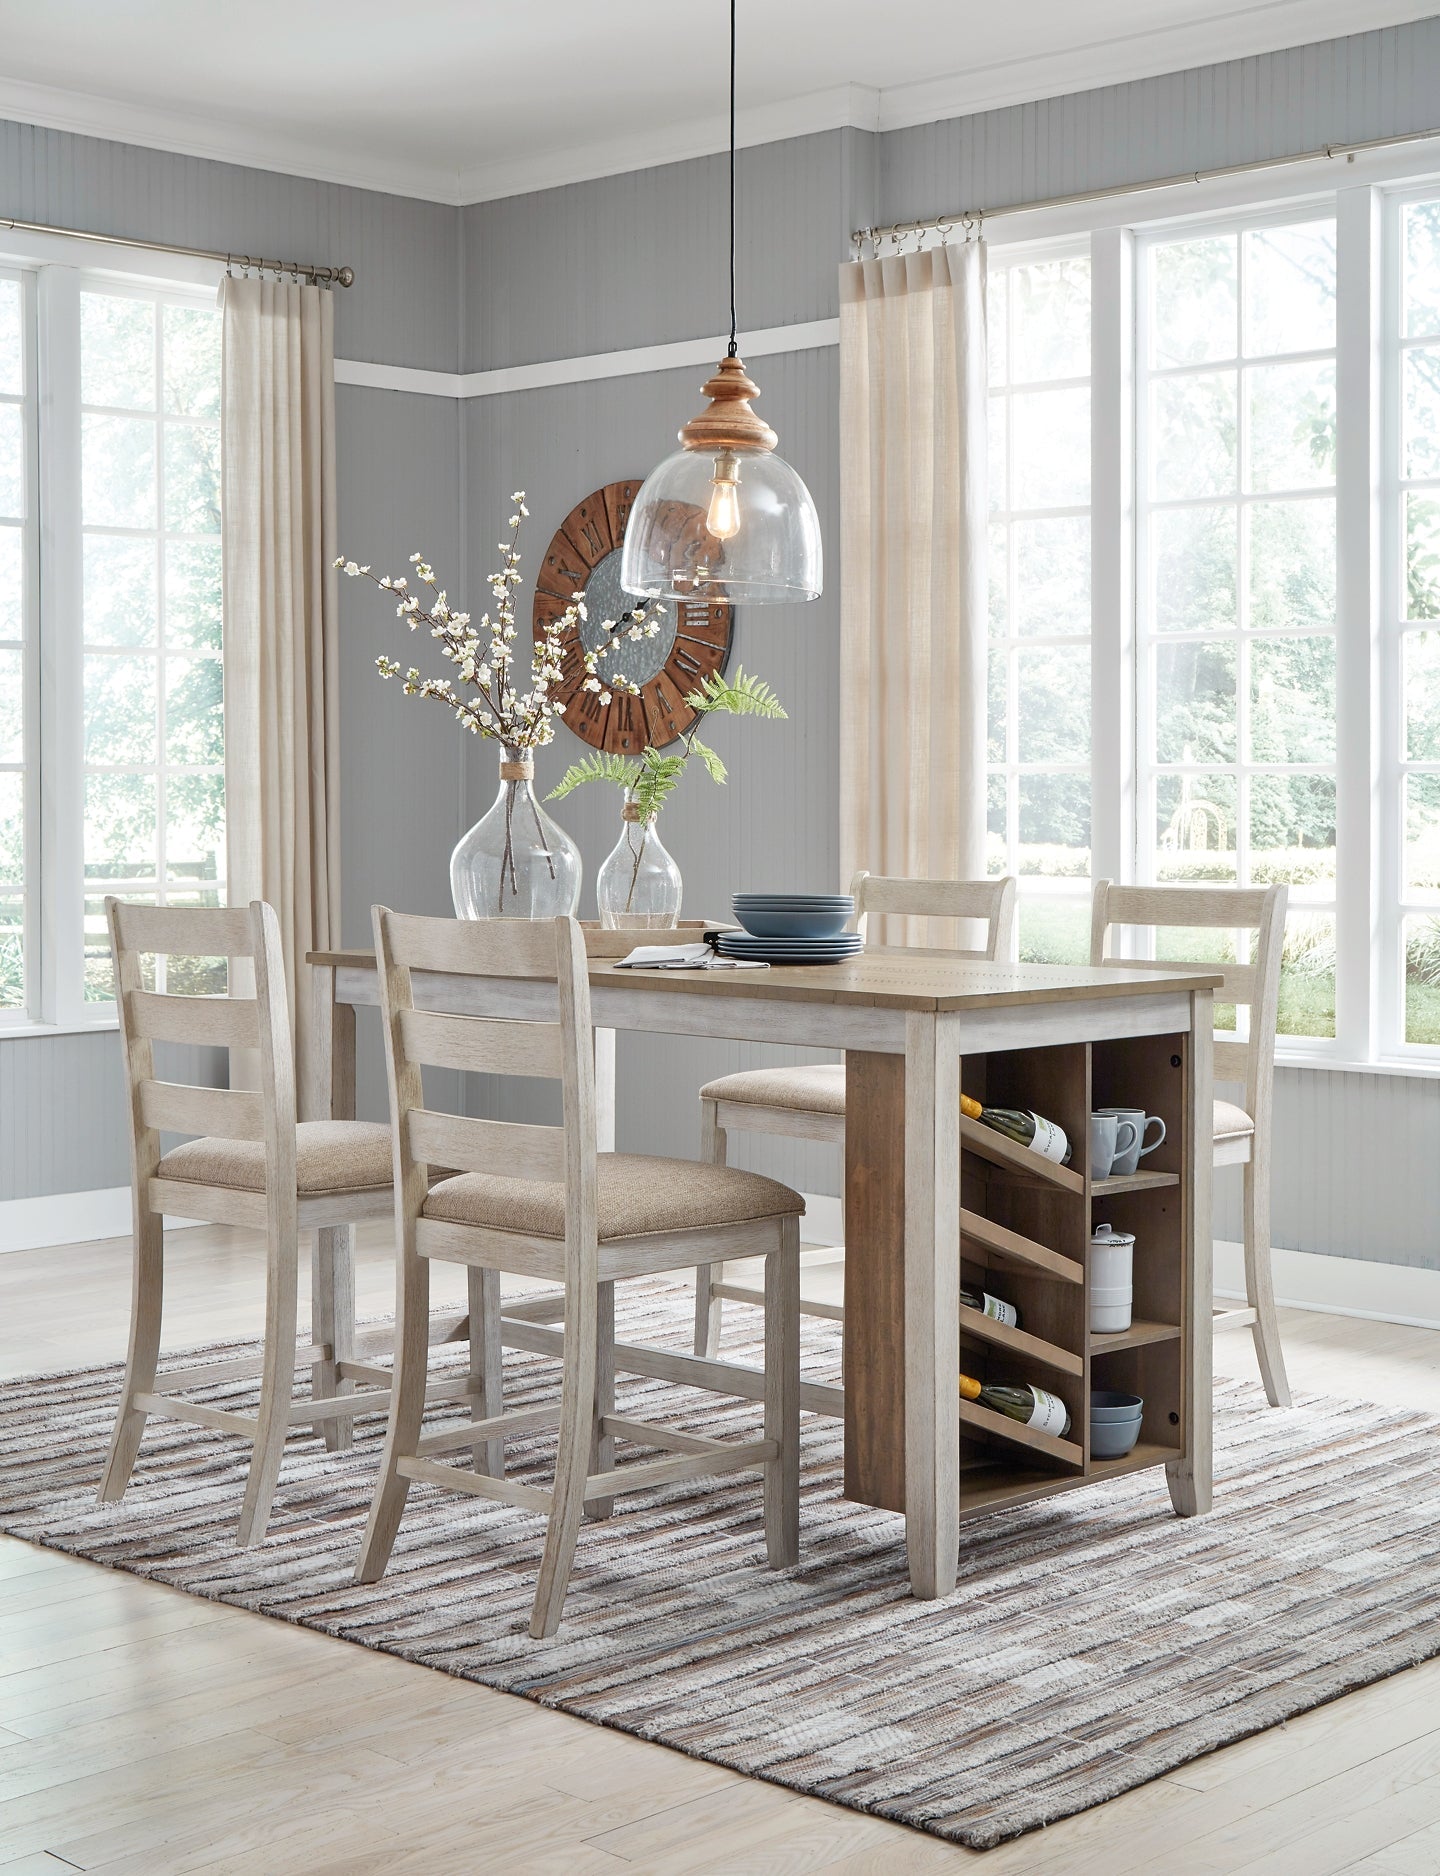 Skempton Counter Height Dining Table and 4 Barstools at Walker Mattress and Furniture Locations in Cedar Park and Belton TX.